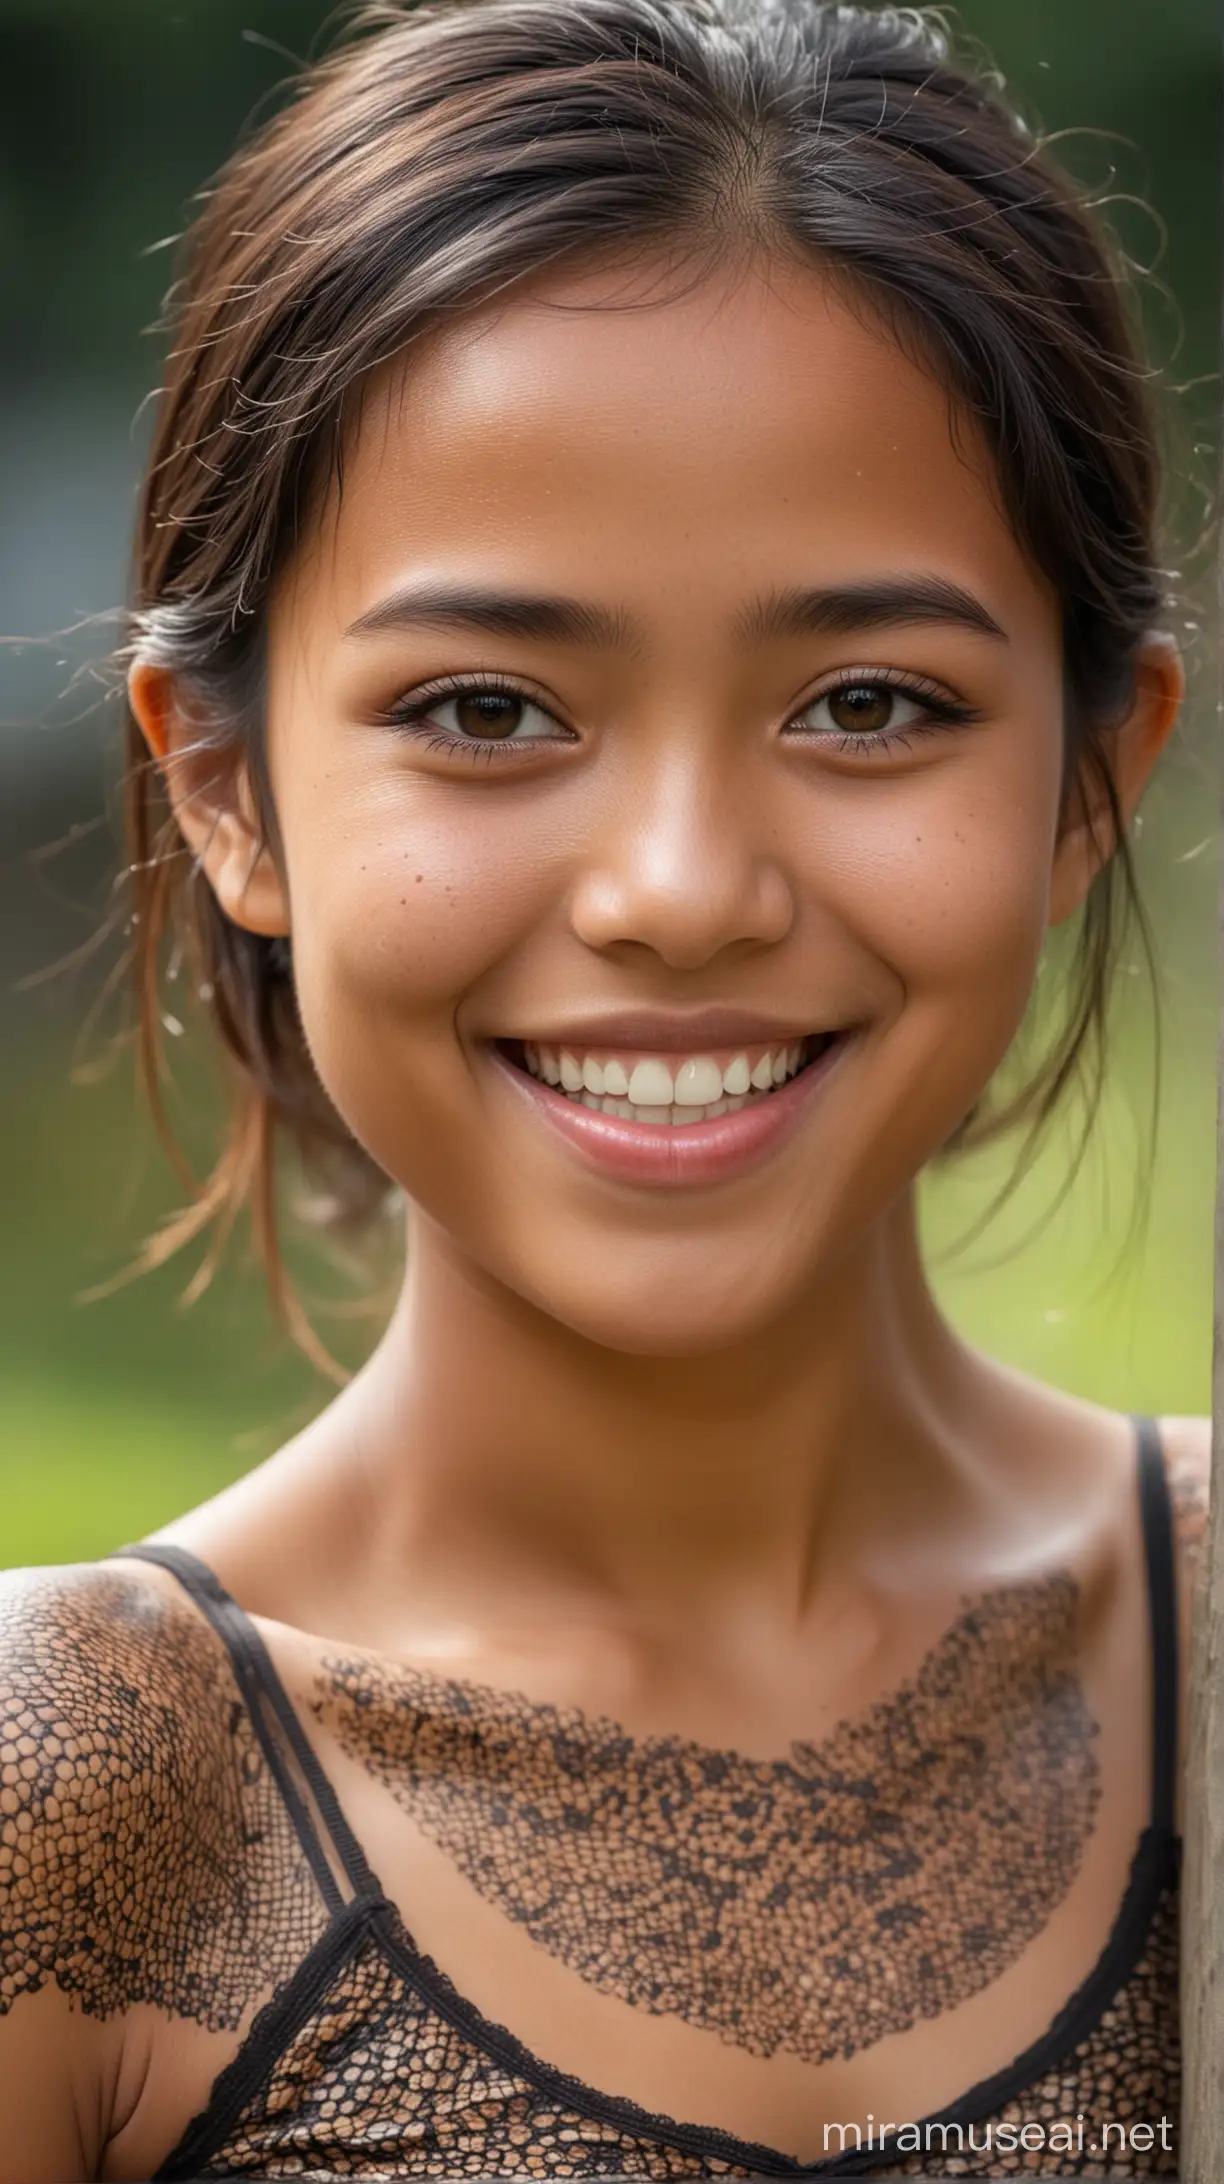 Indonesian Young Girl Smiling Outdoors Portrait